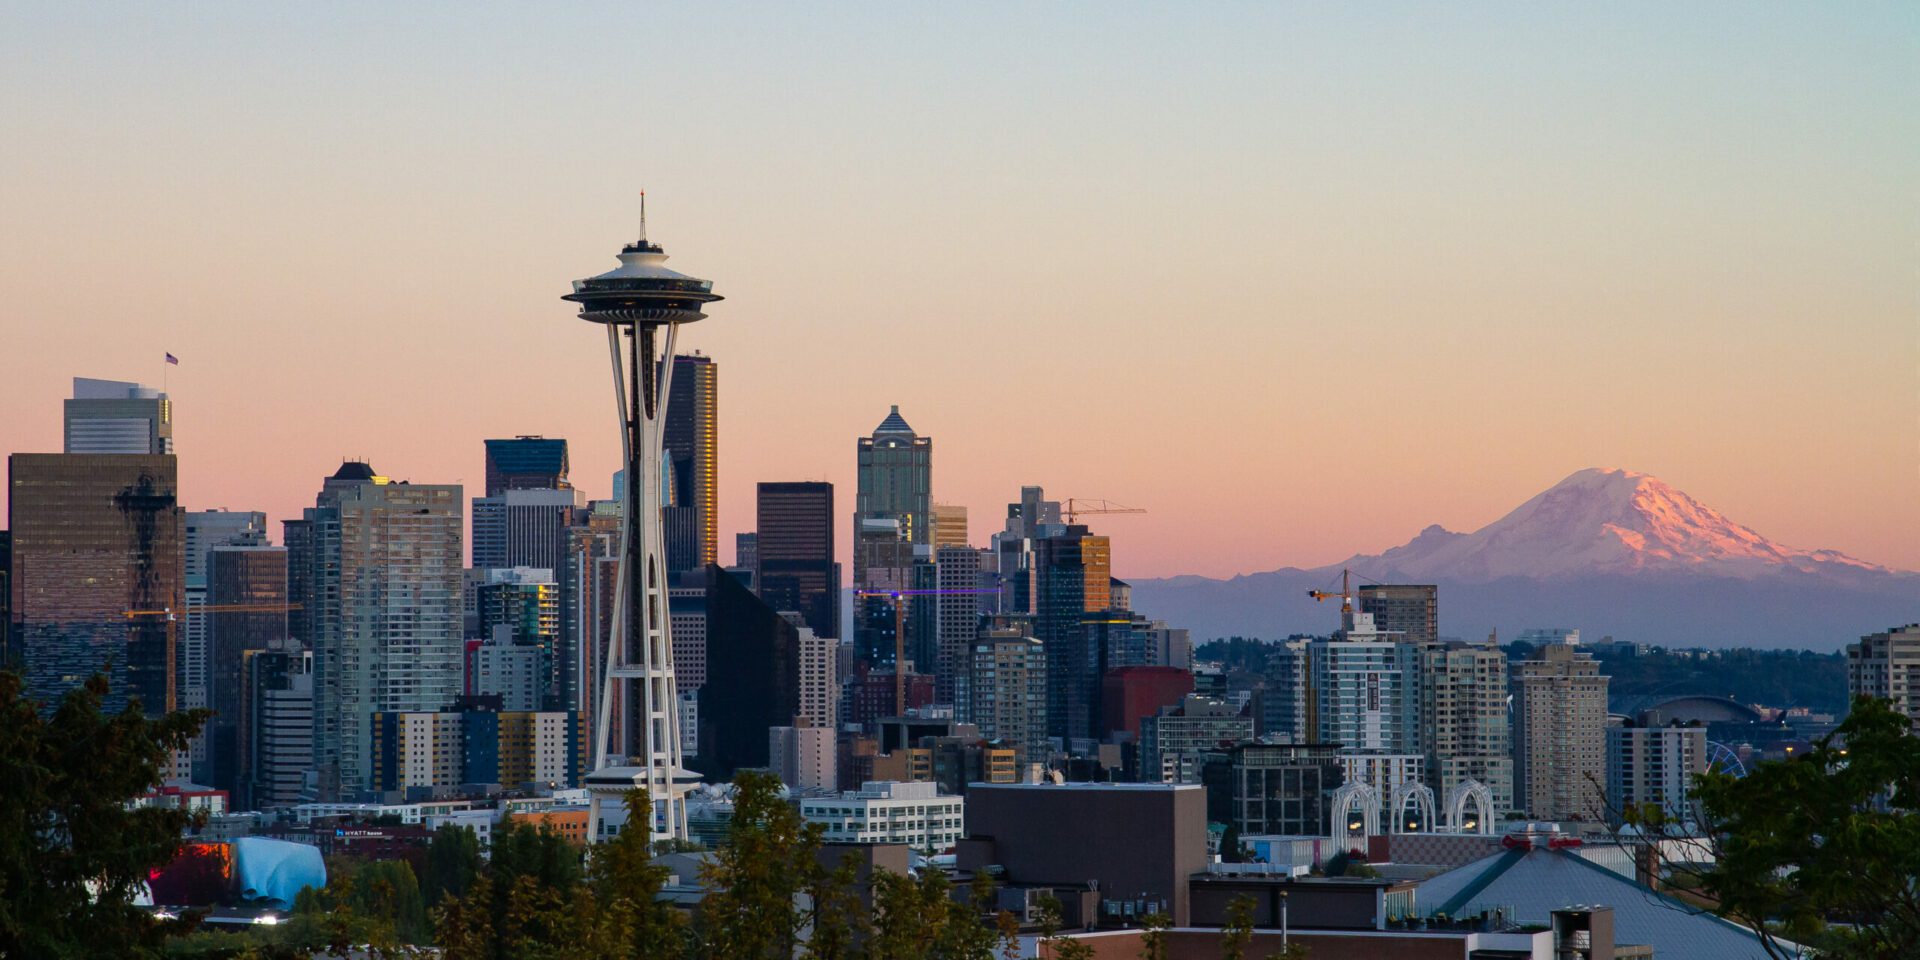 Built in Seattle: These 5 Seattle Tech Companies Raised a Combined $730M+ in April